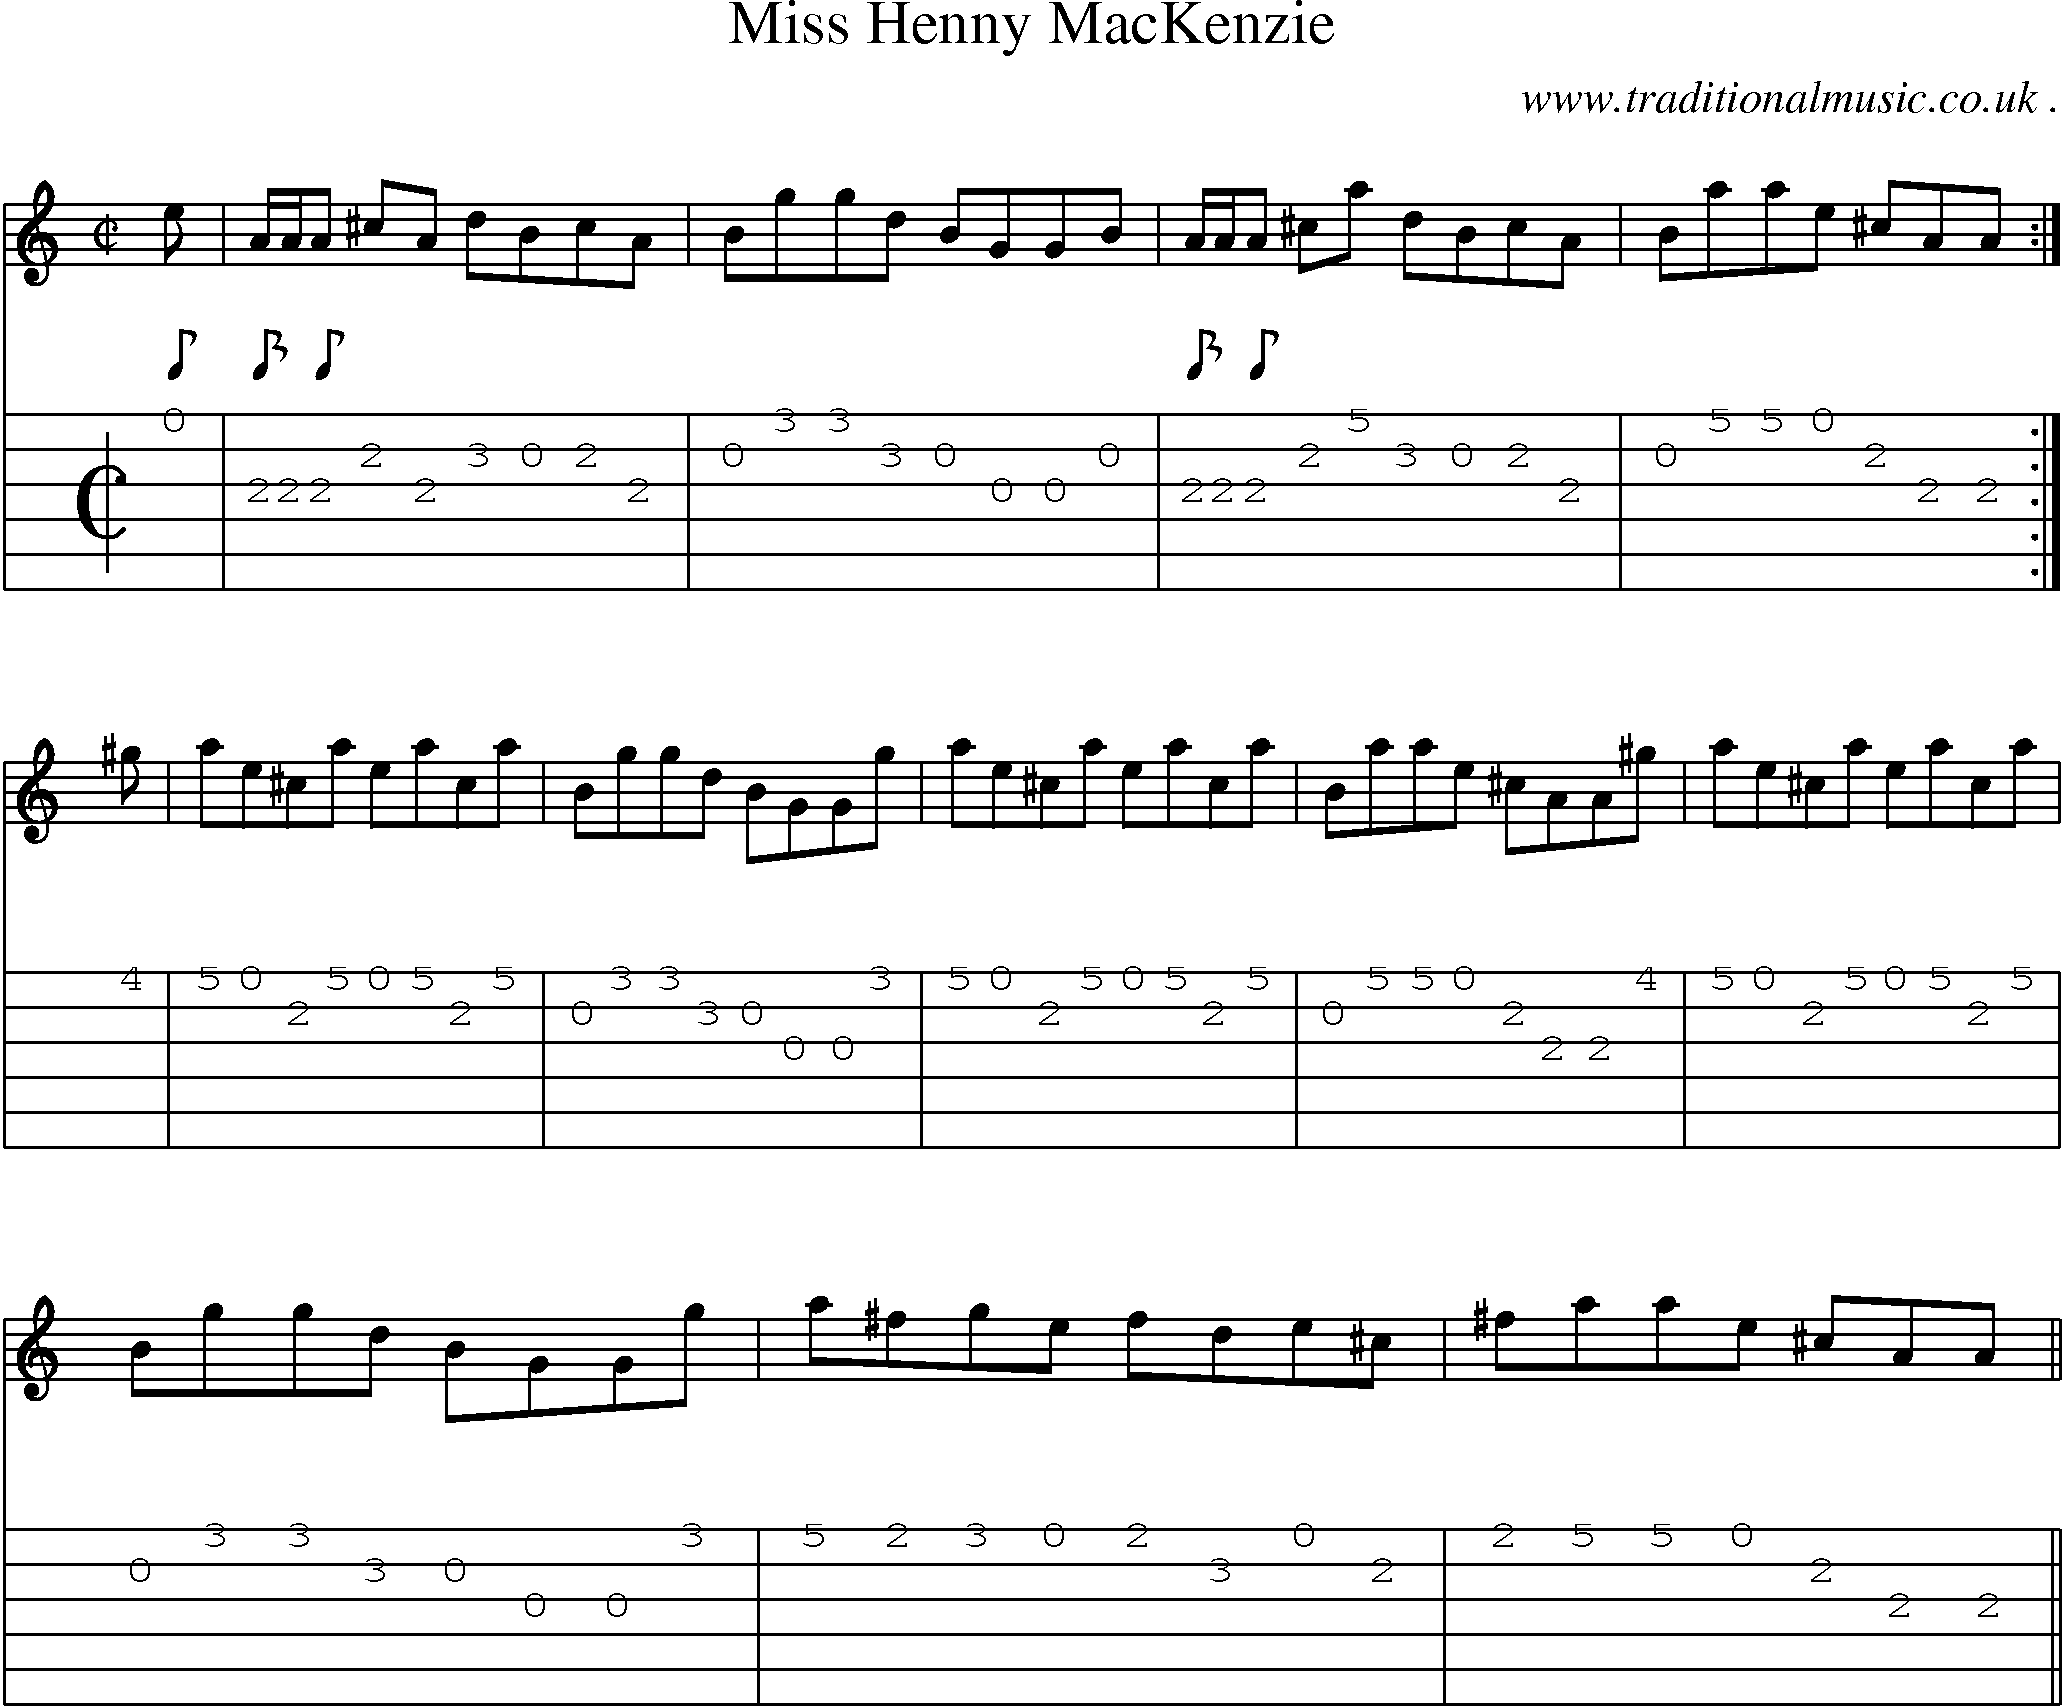 Sheet-music  score, Chords and Guitar Tabs for Miss Henny Mackenzie